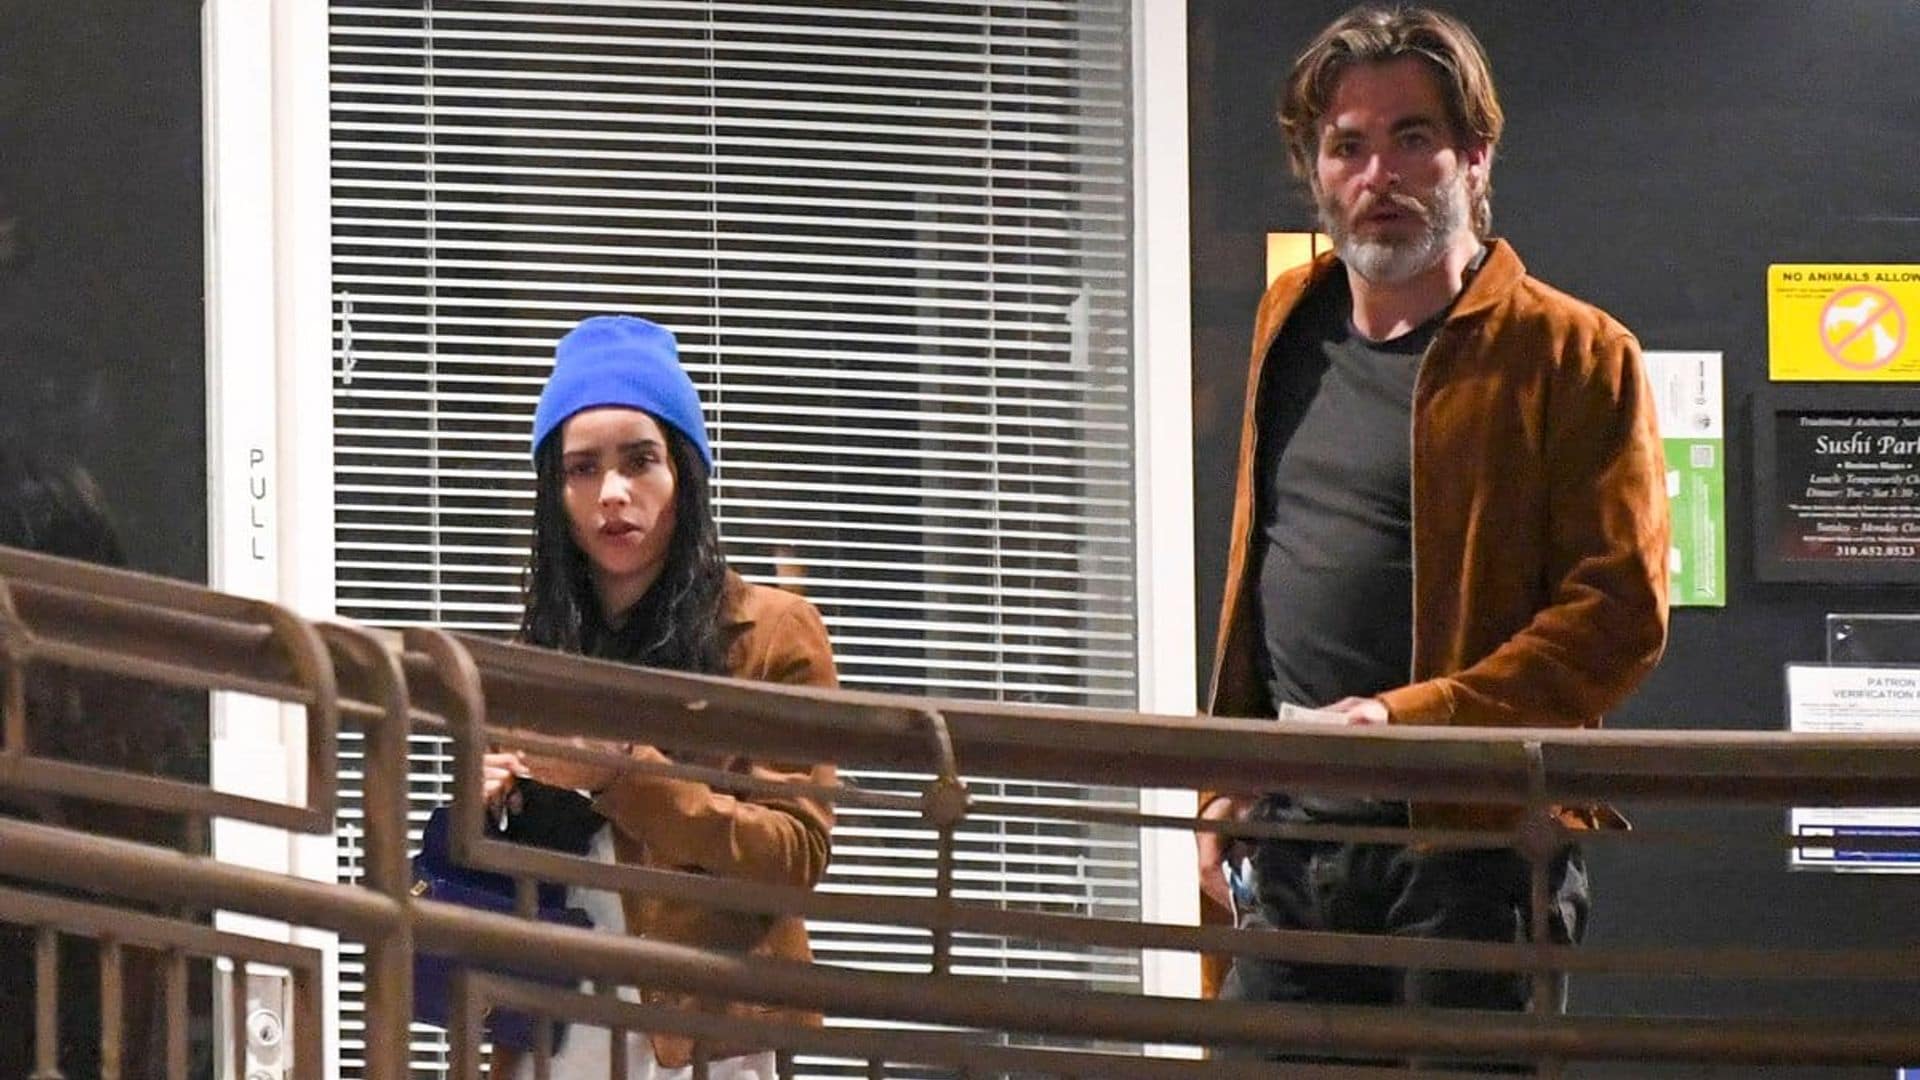 Zoe Kravitz and Chris Pine go out for sushi in Los Angeles